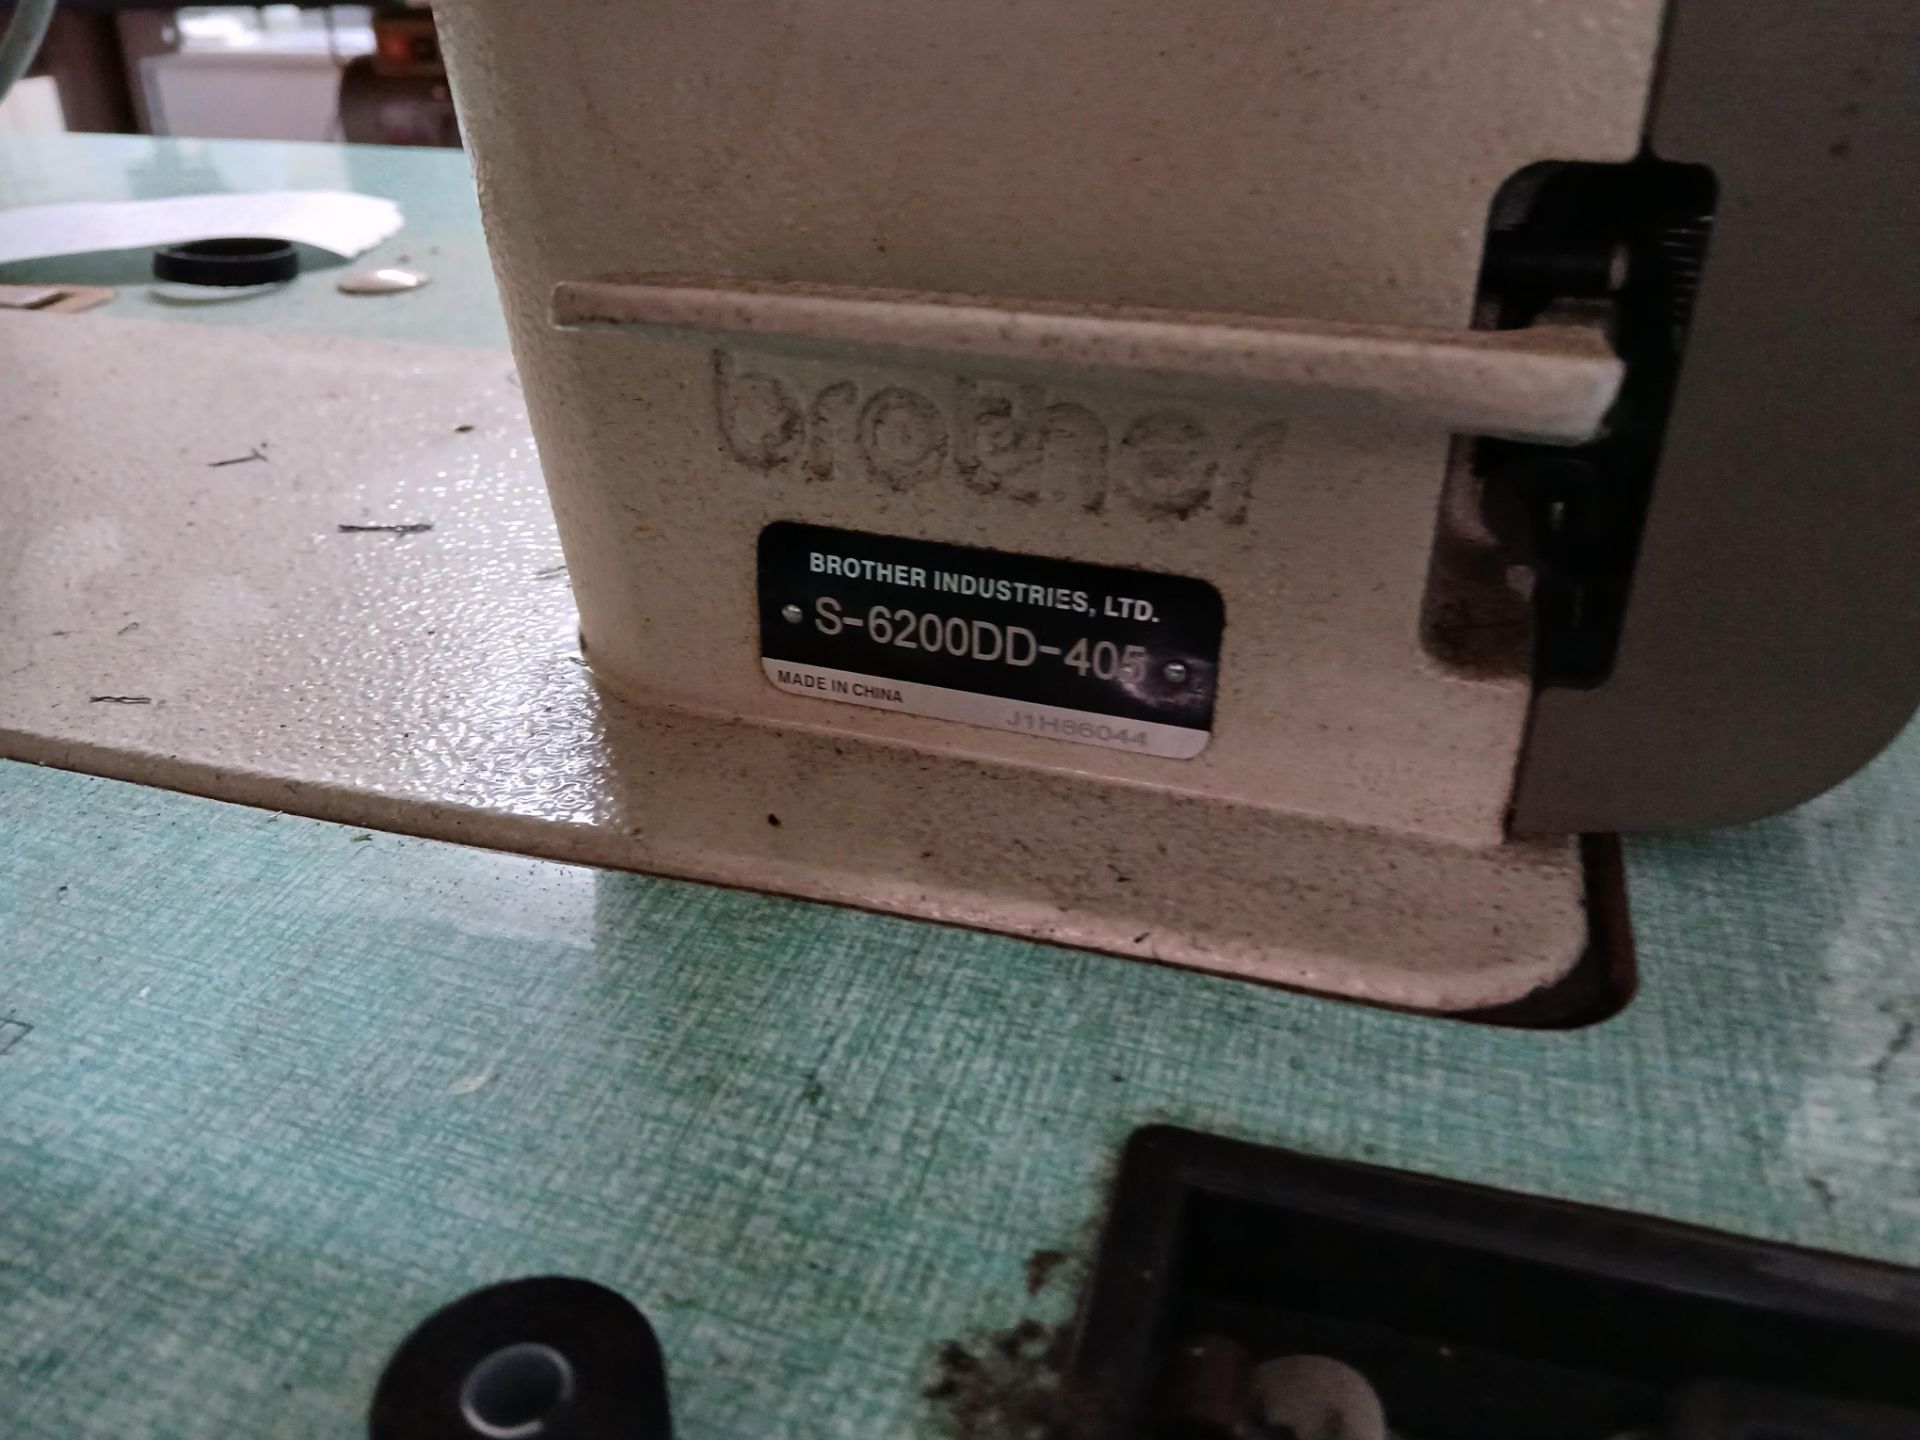 Brother S-6200DD-405 sewing machine 240v - Image 4 of 4